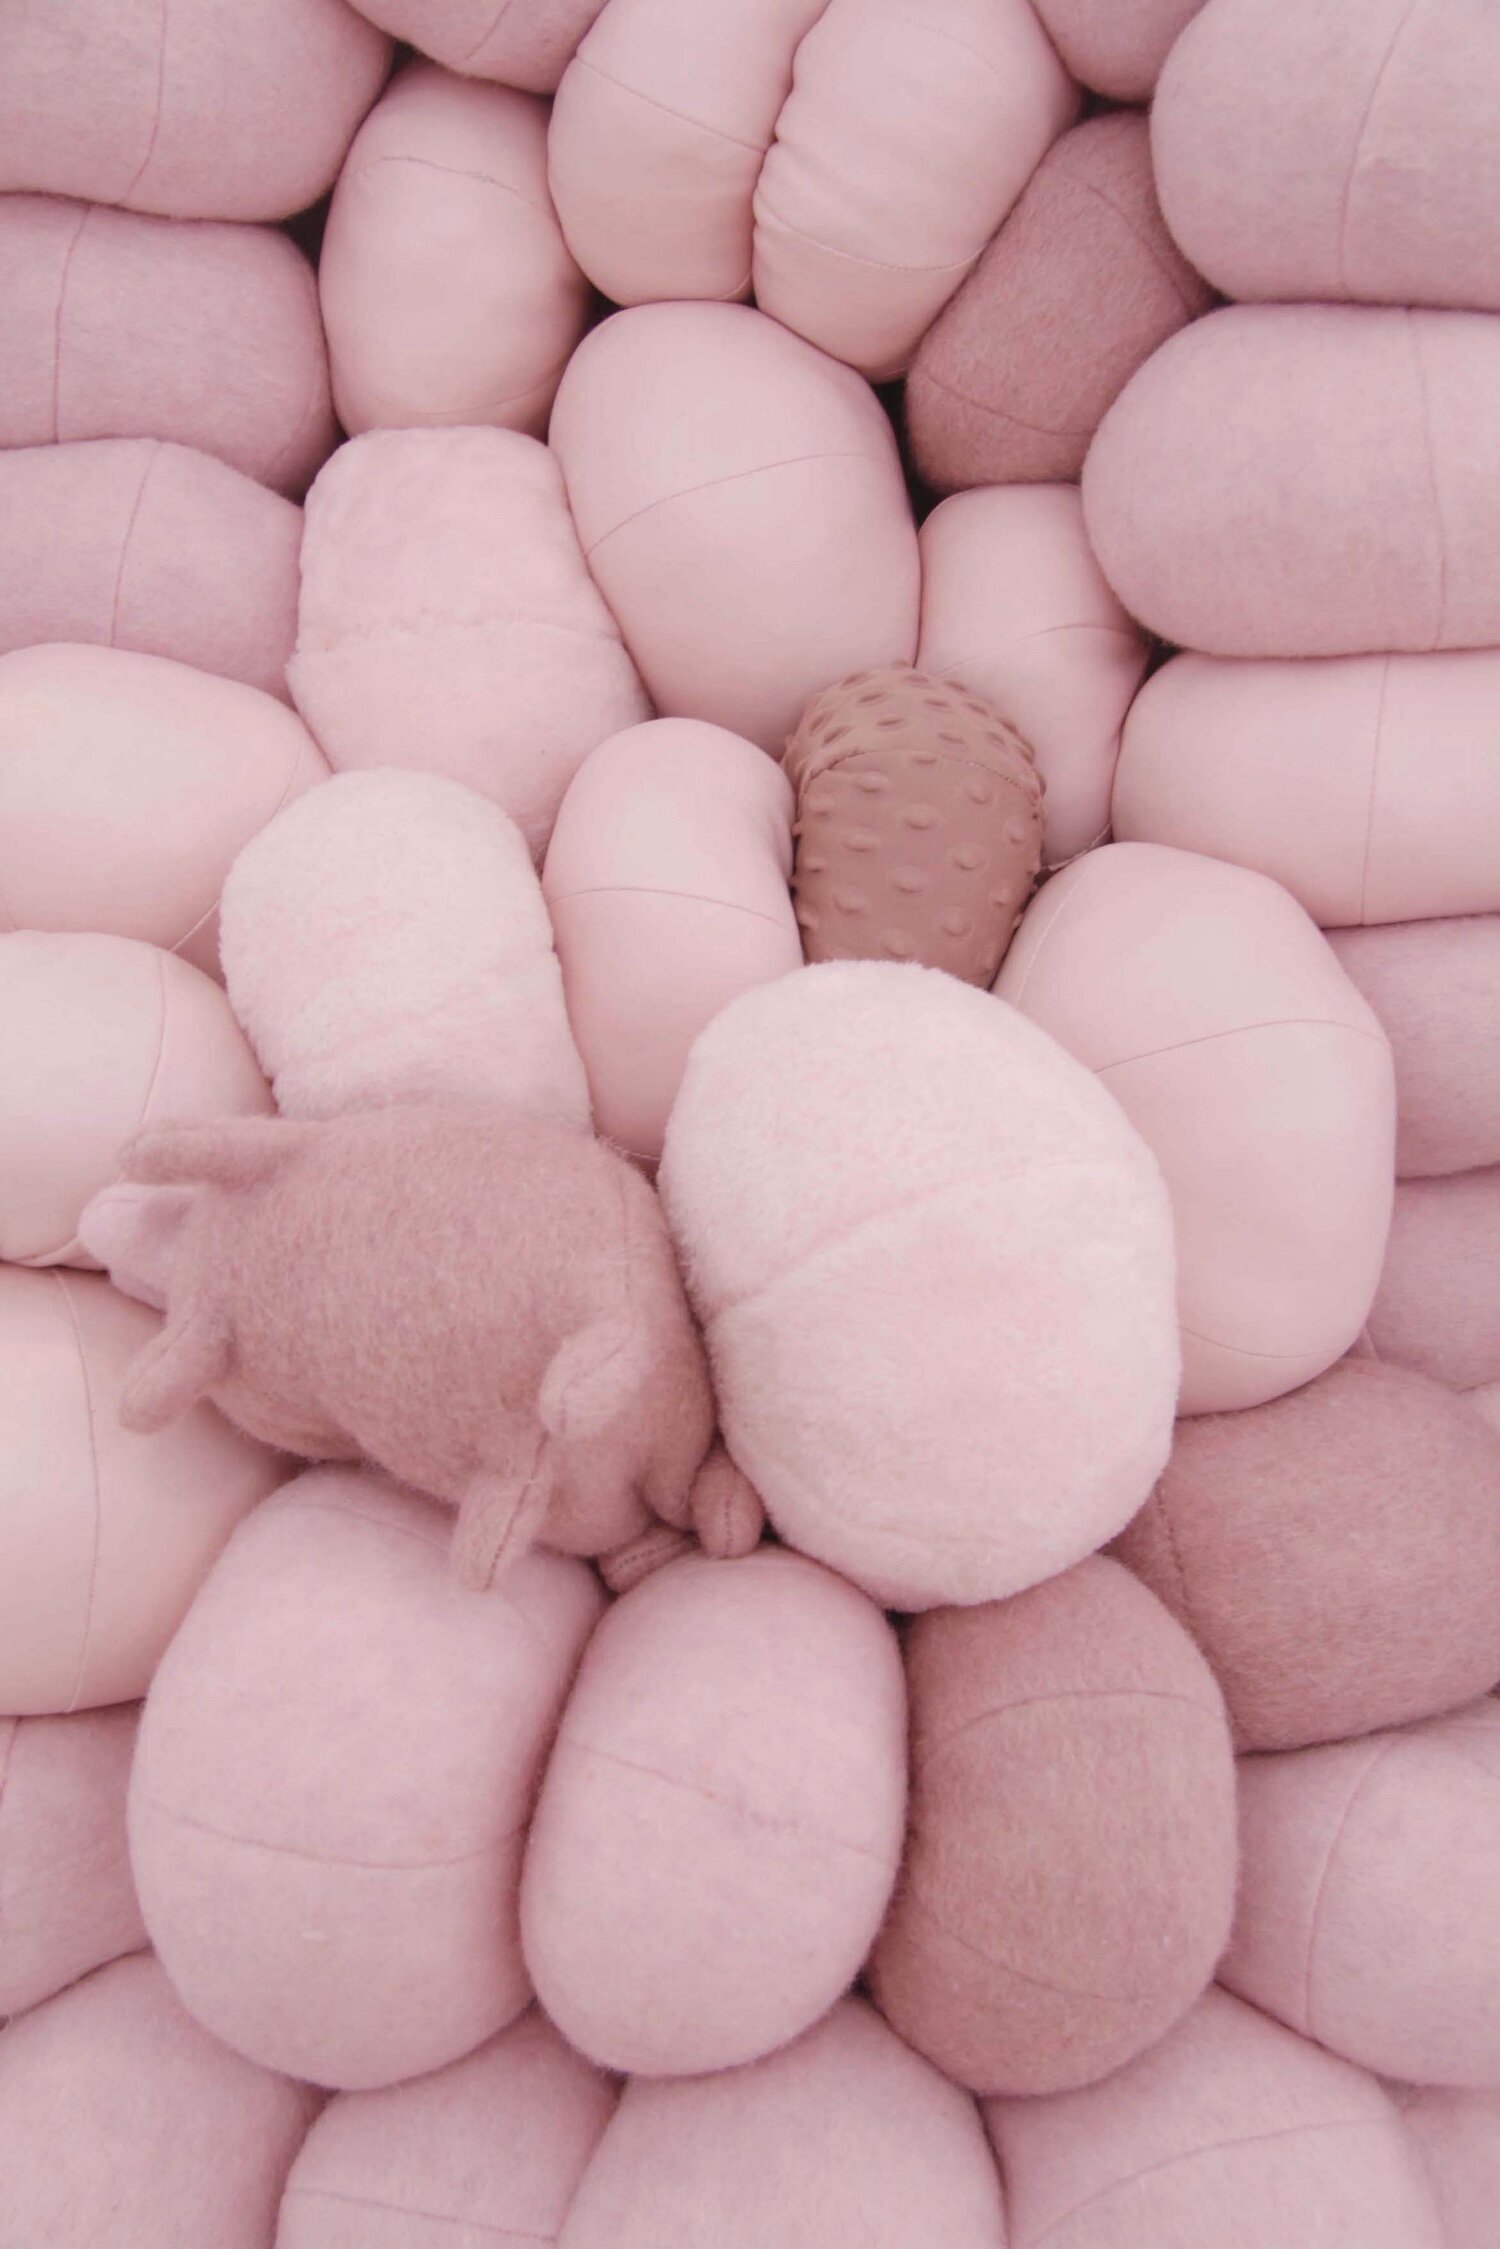   Pushback, 2019   Installation of 45 soft sculptures in fixed shelving 